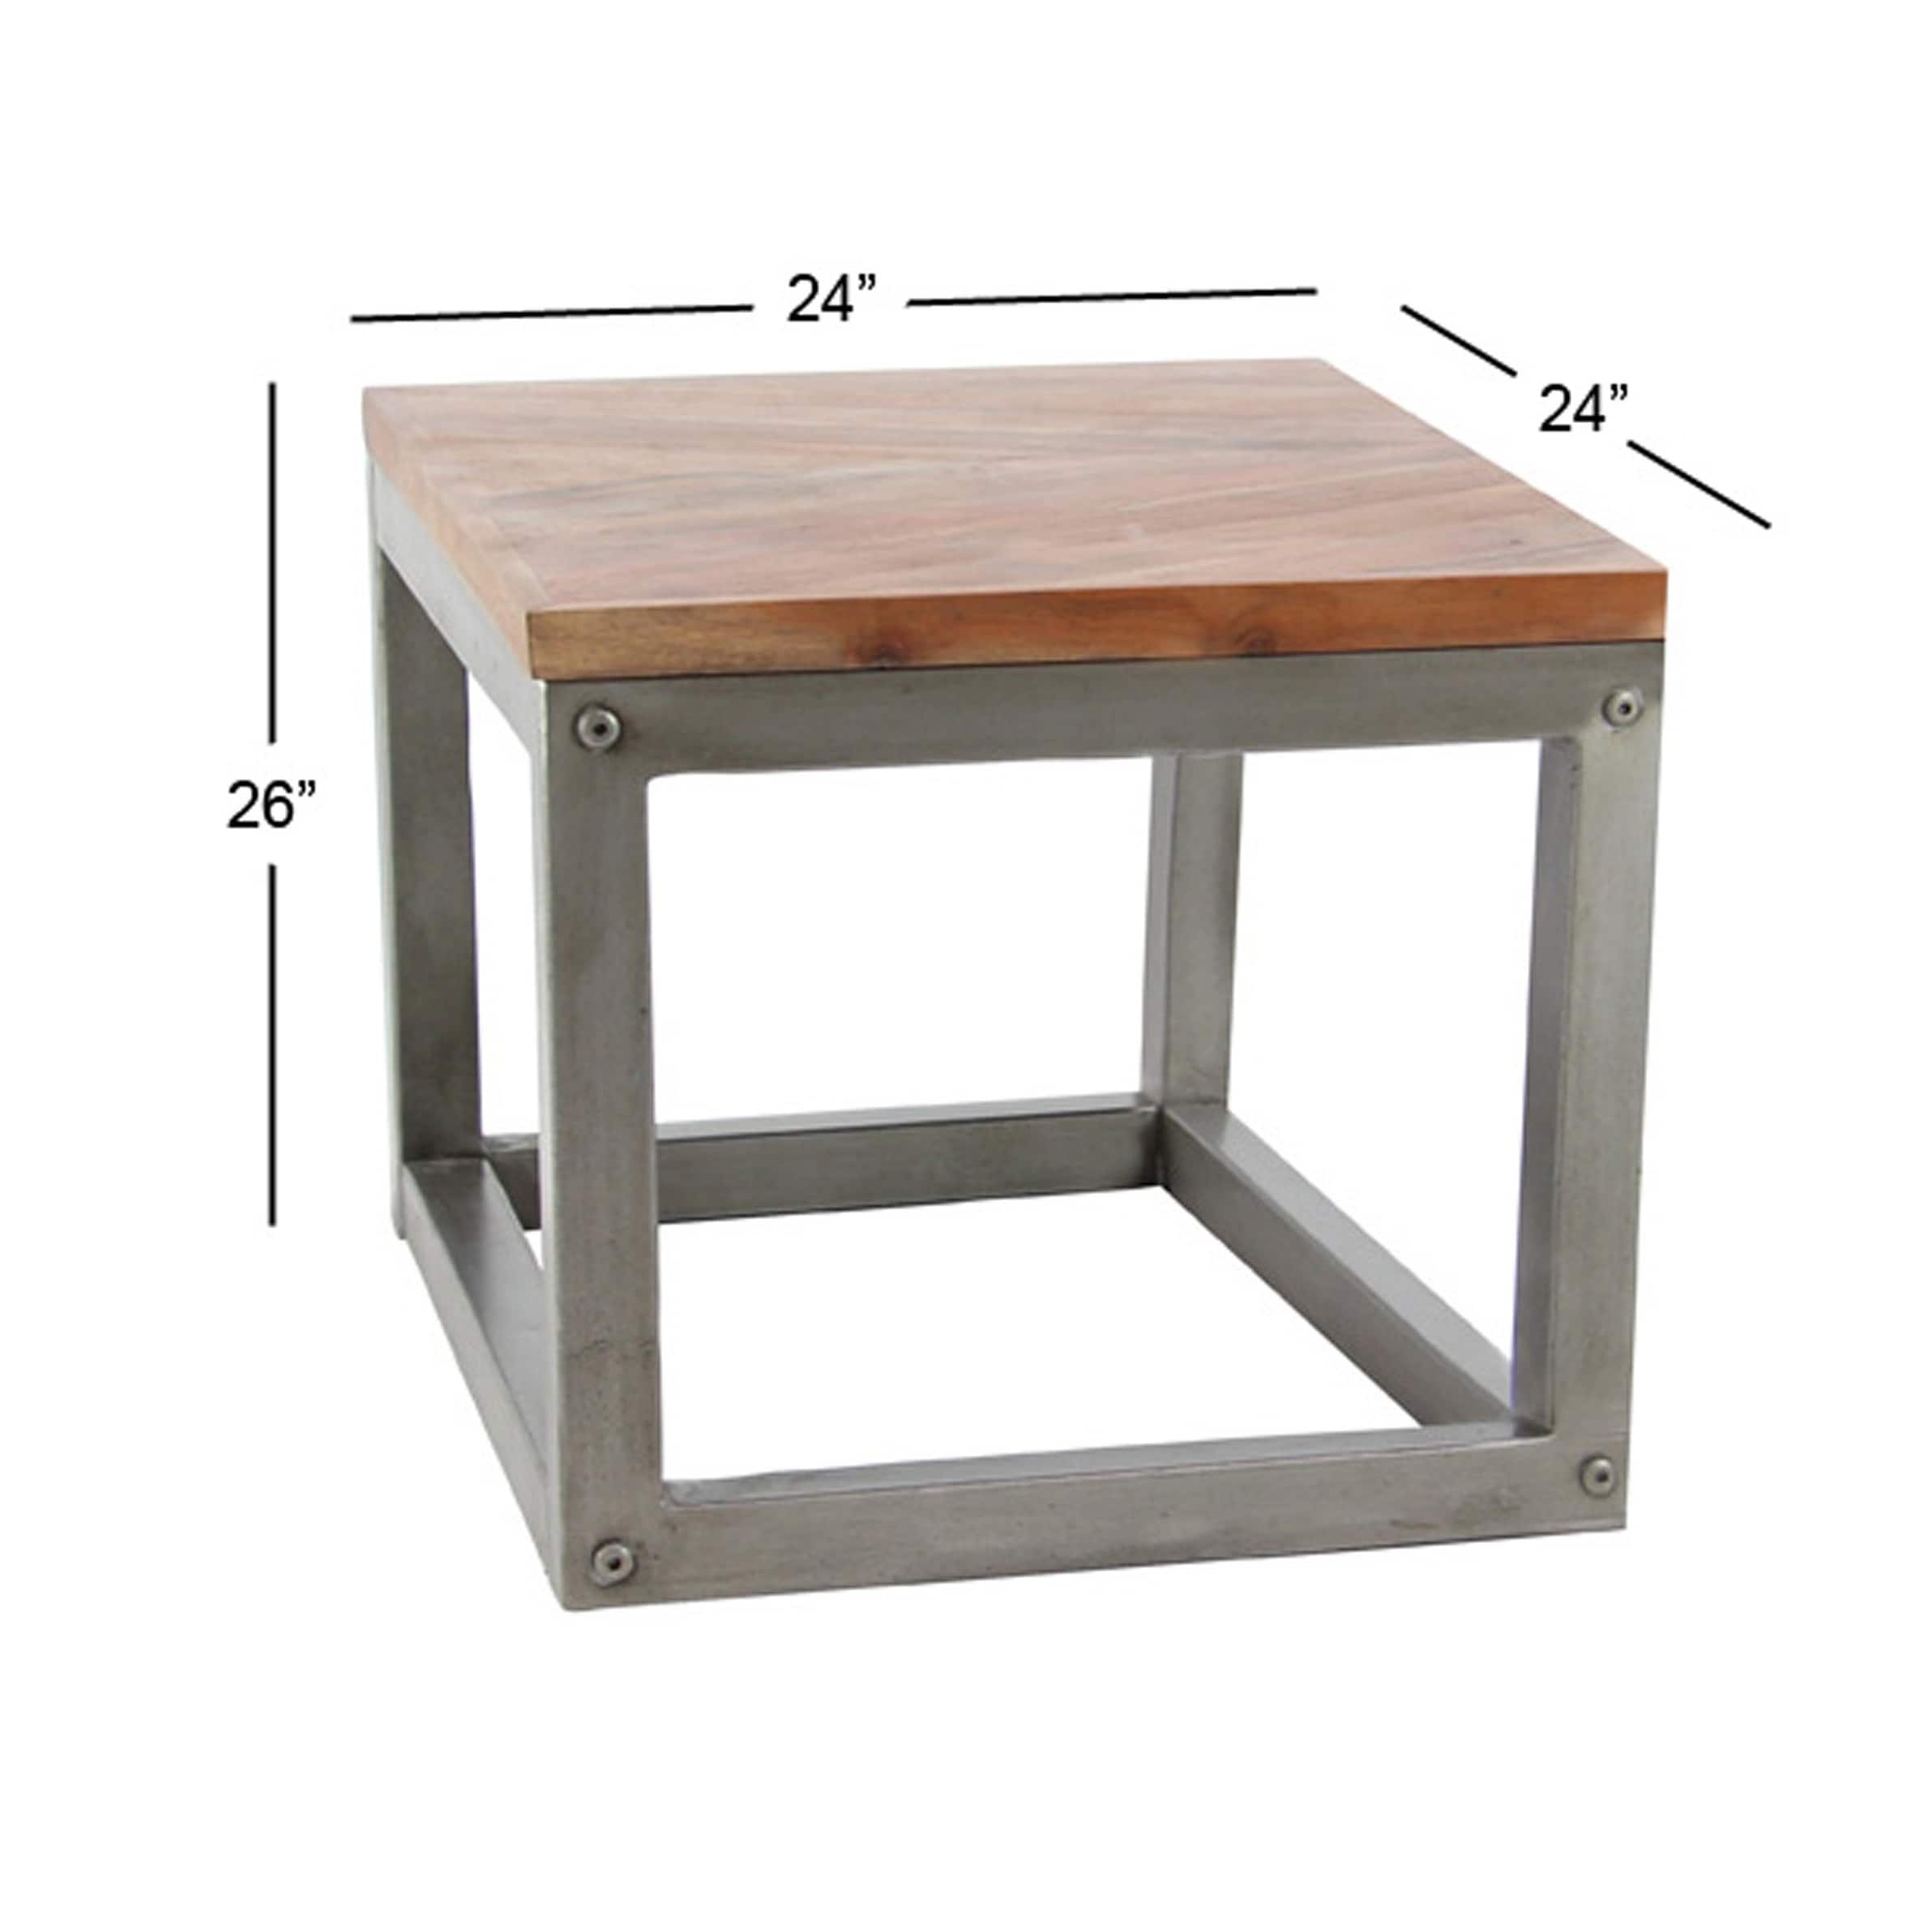 24 Inch Square Table